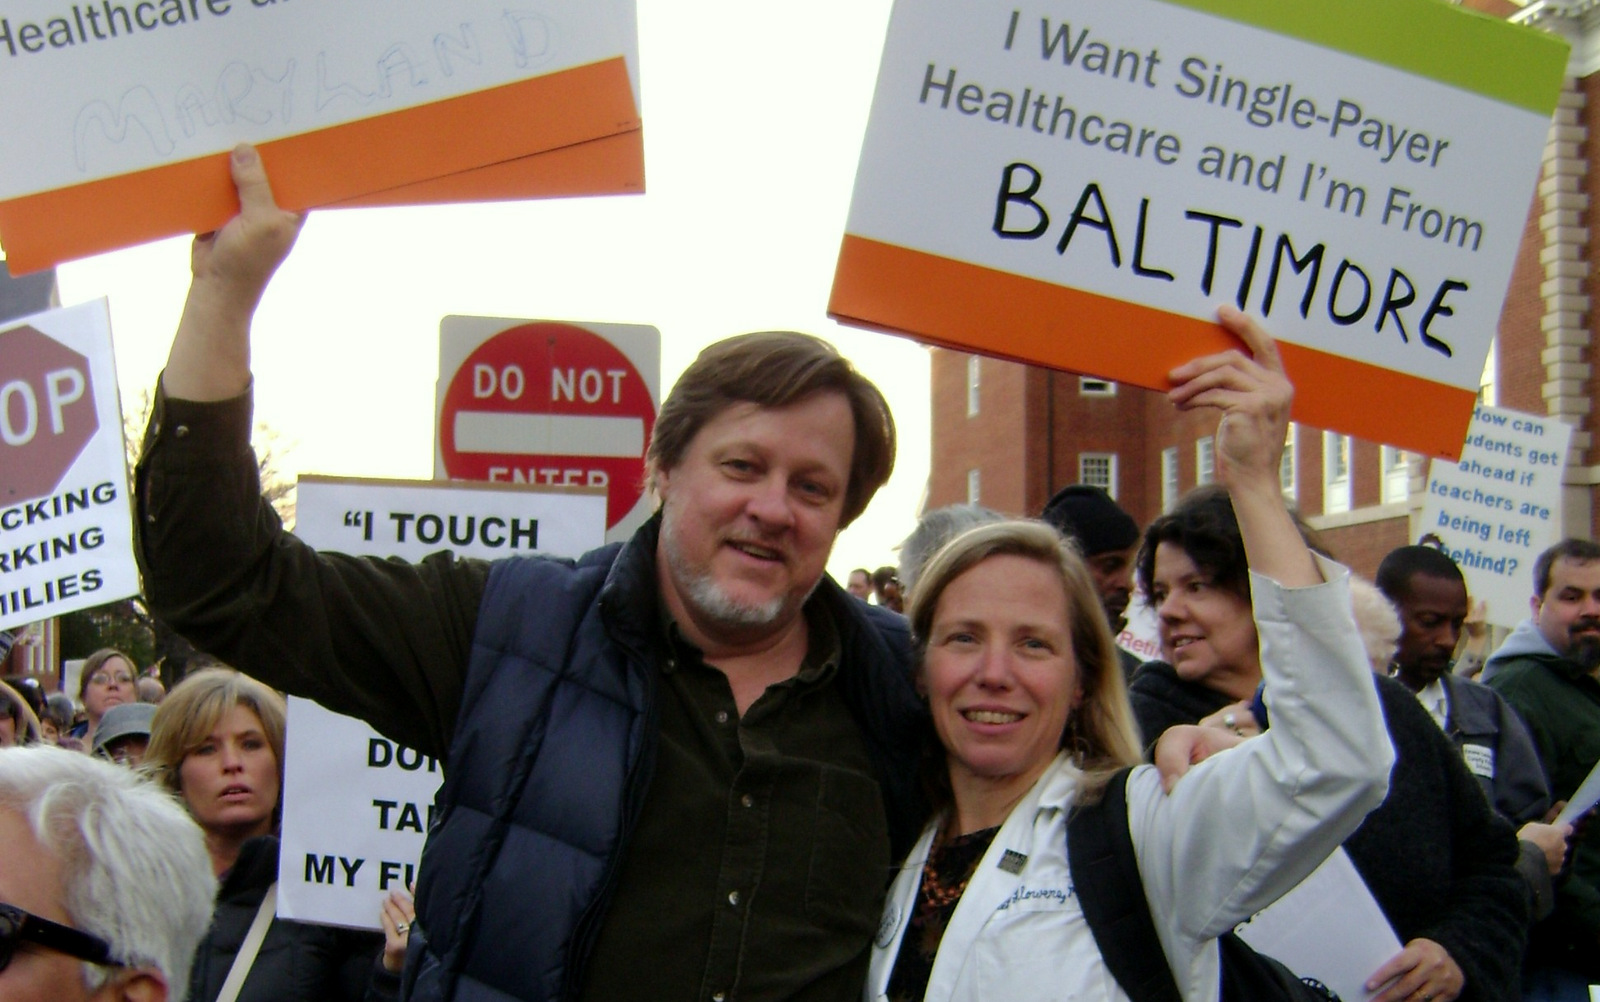 Above: Kevin Zeese and Margaret Flowers at a single payer health care rally in Baltimore, MD.